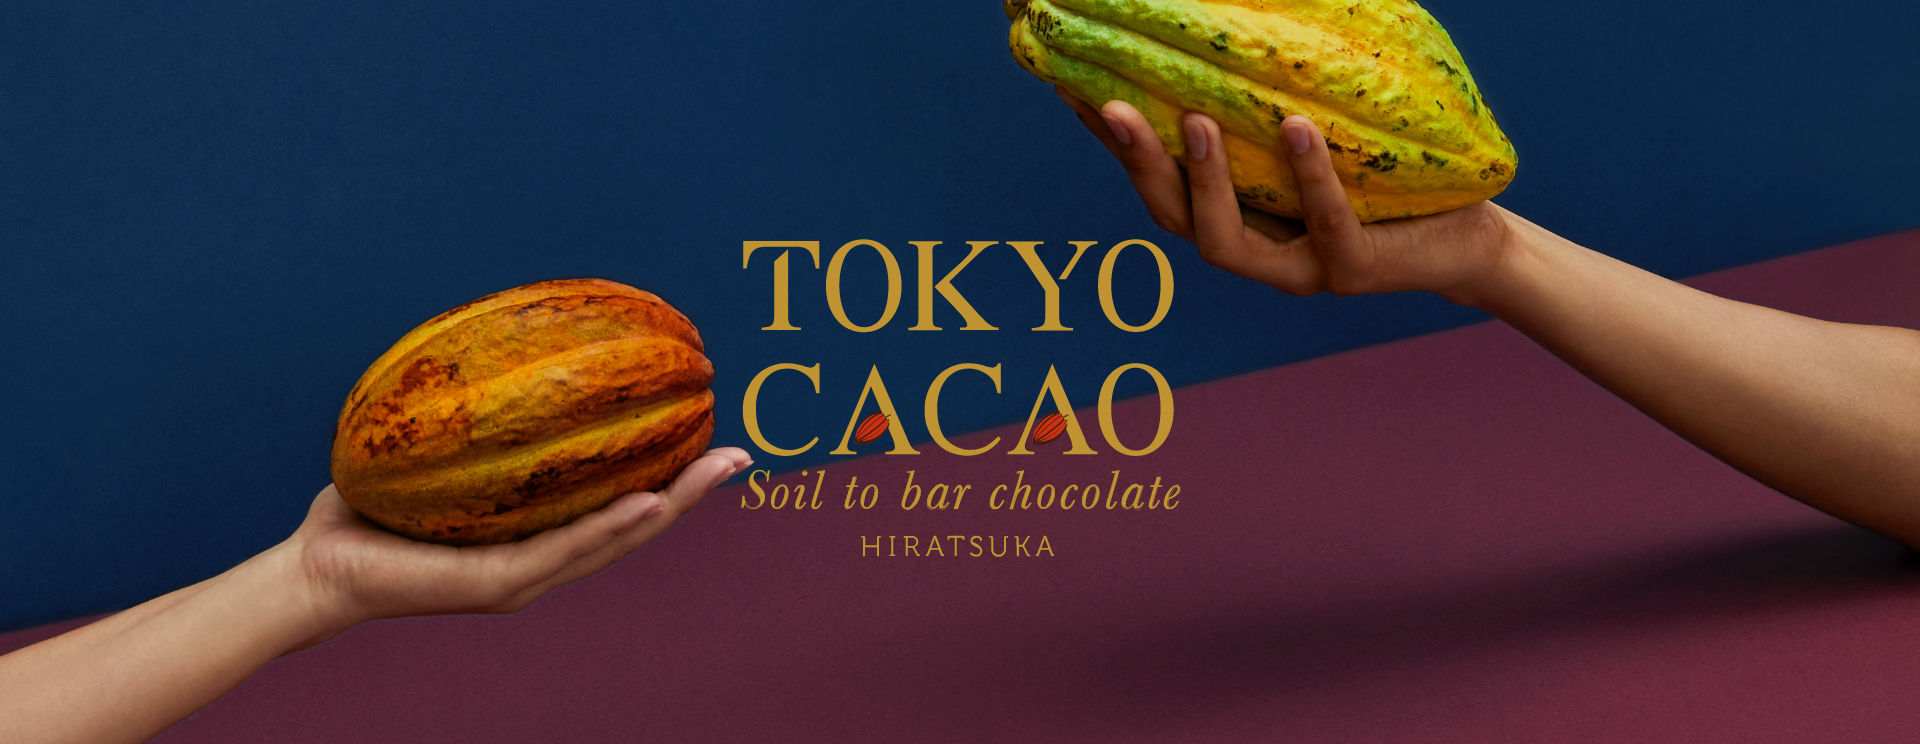 TOKYO CACAO Soil to bar chocolate